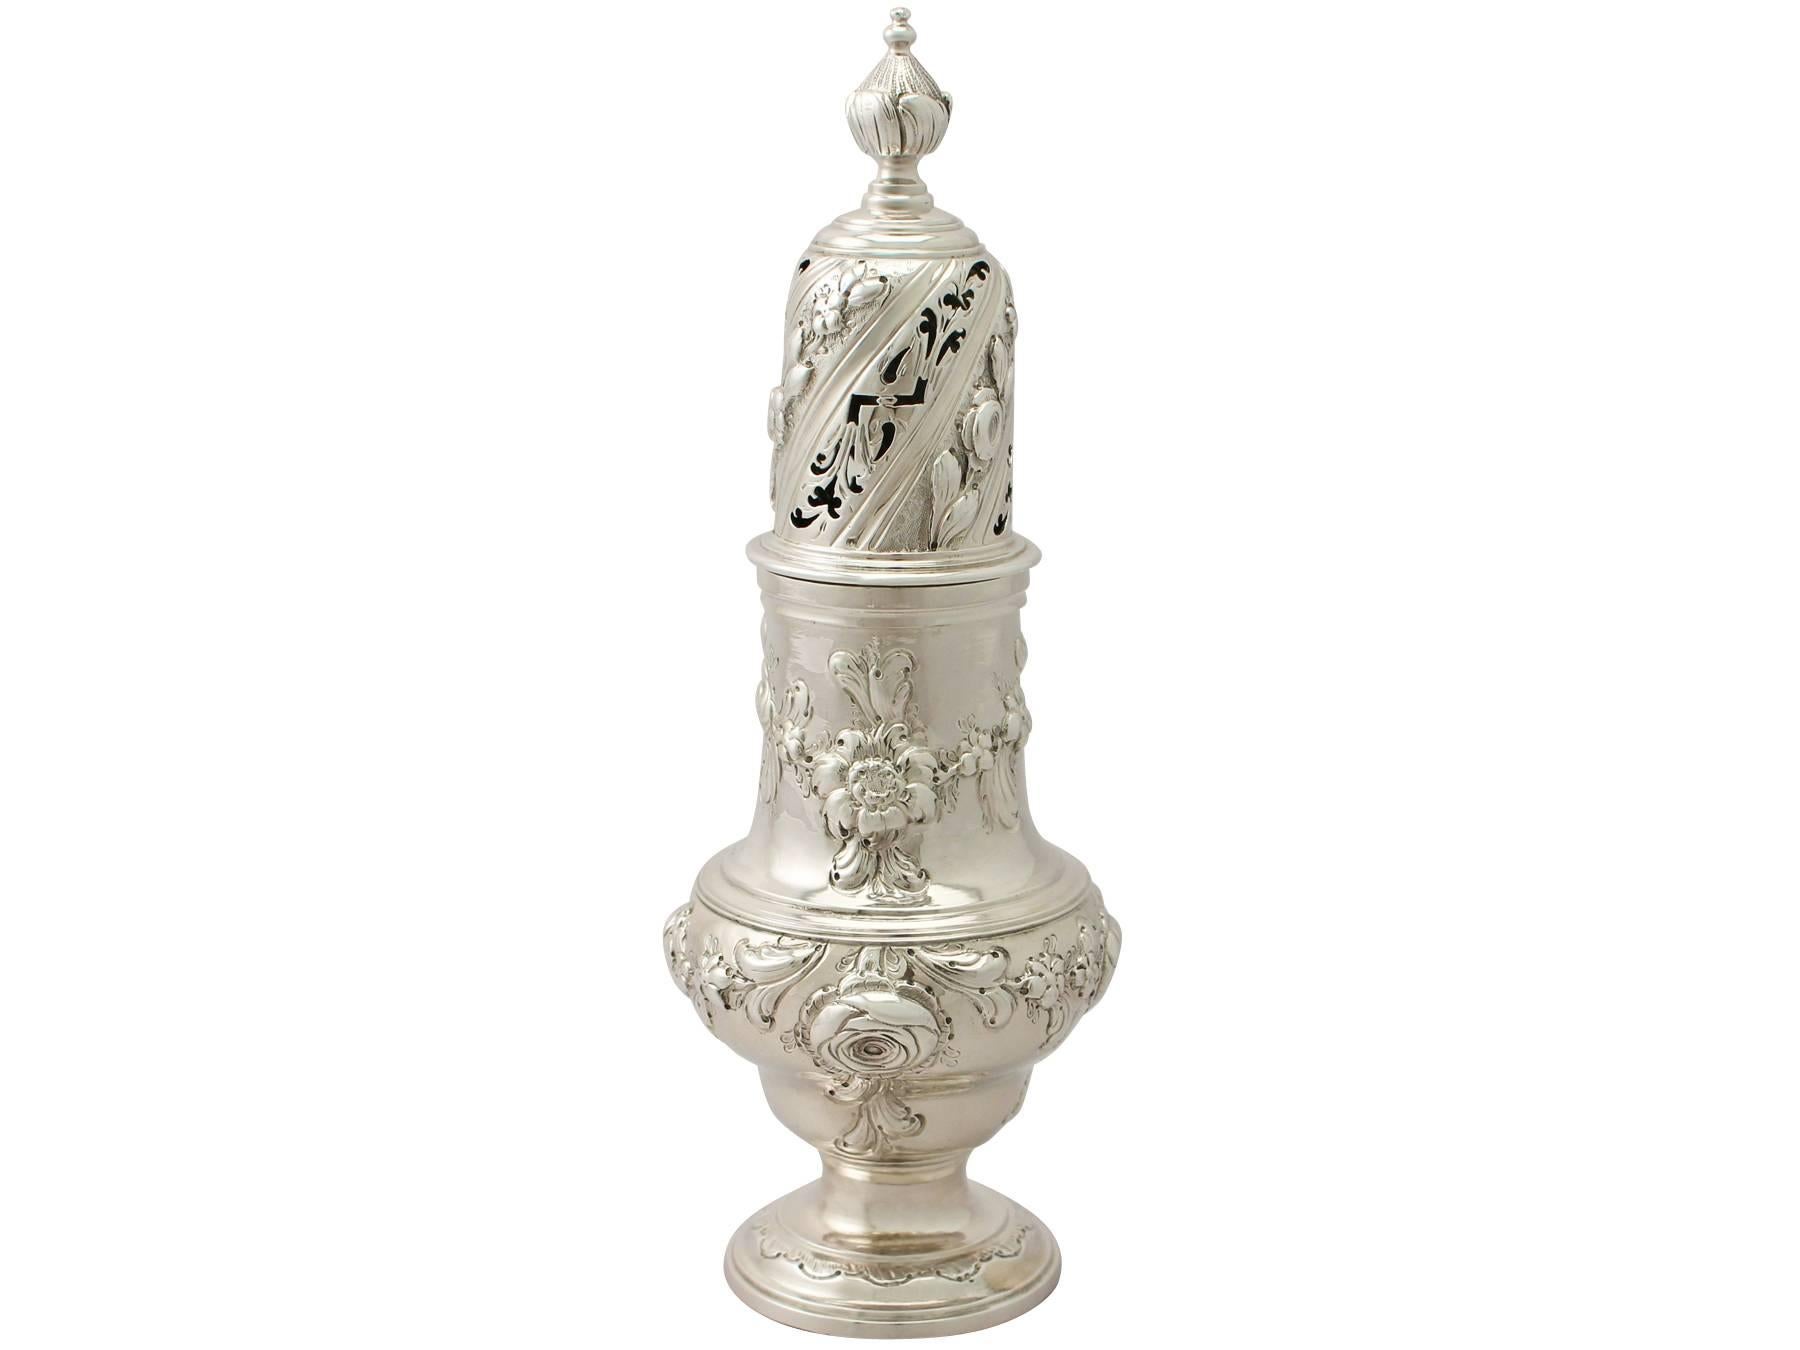 An exceptional, fine and impressive antique George III English sterling silver sugar caster; an addition to our silver Georgian teaware collection

This exceptional antique George III sterling silver sugar caster has a plain baluster shaped form